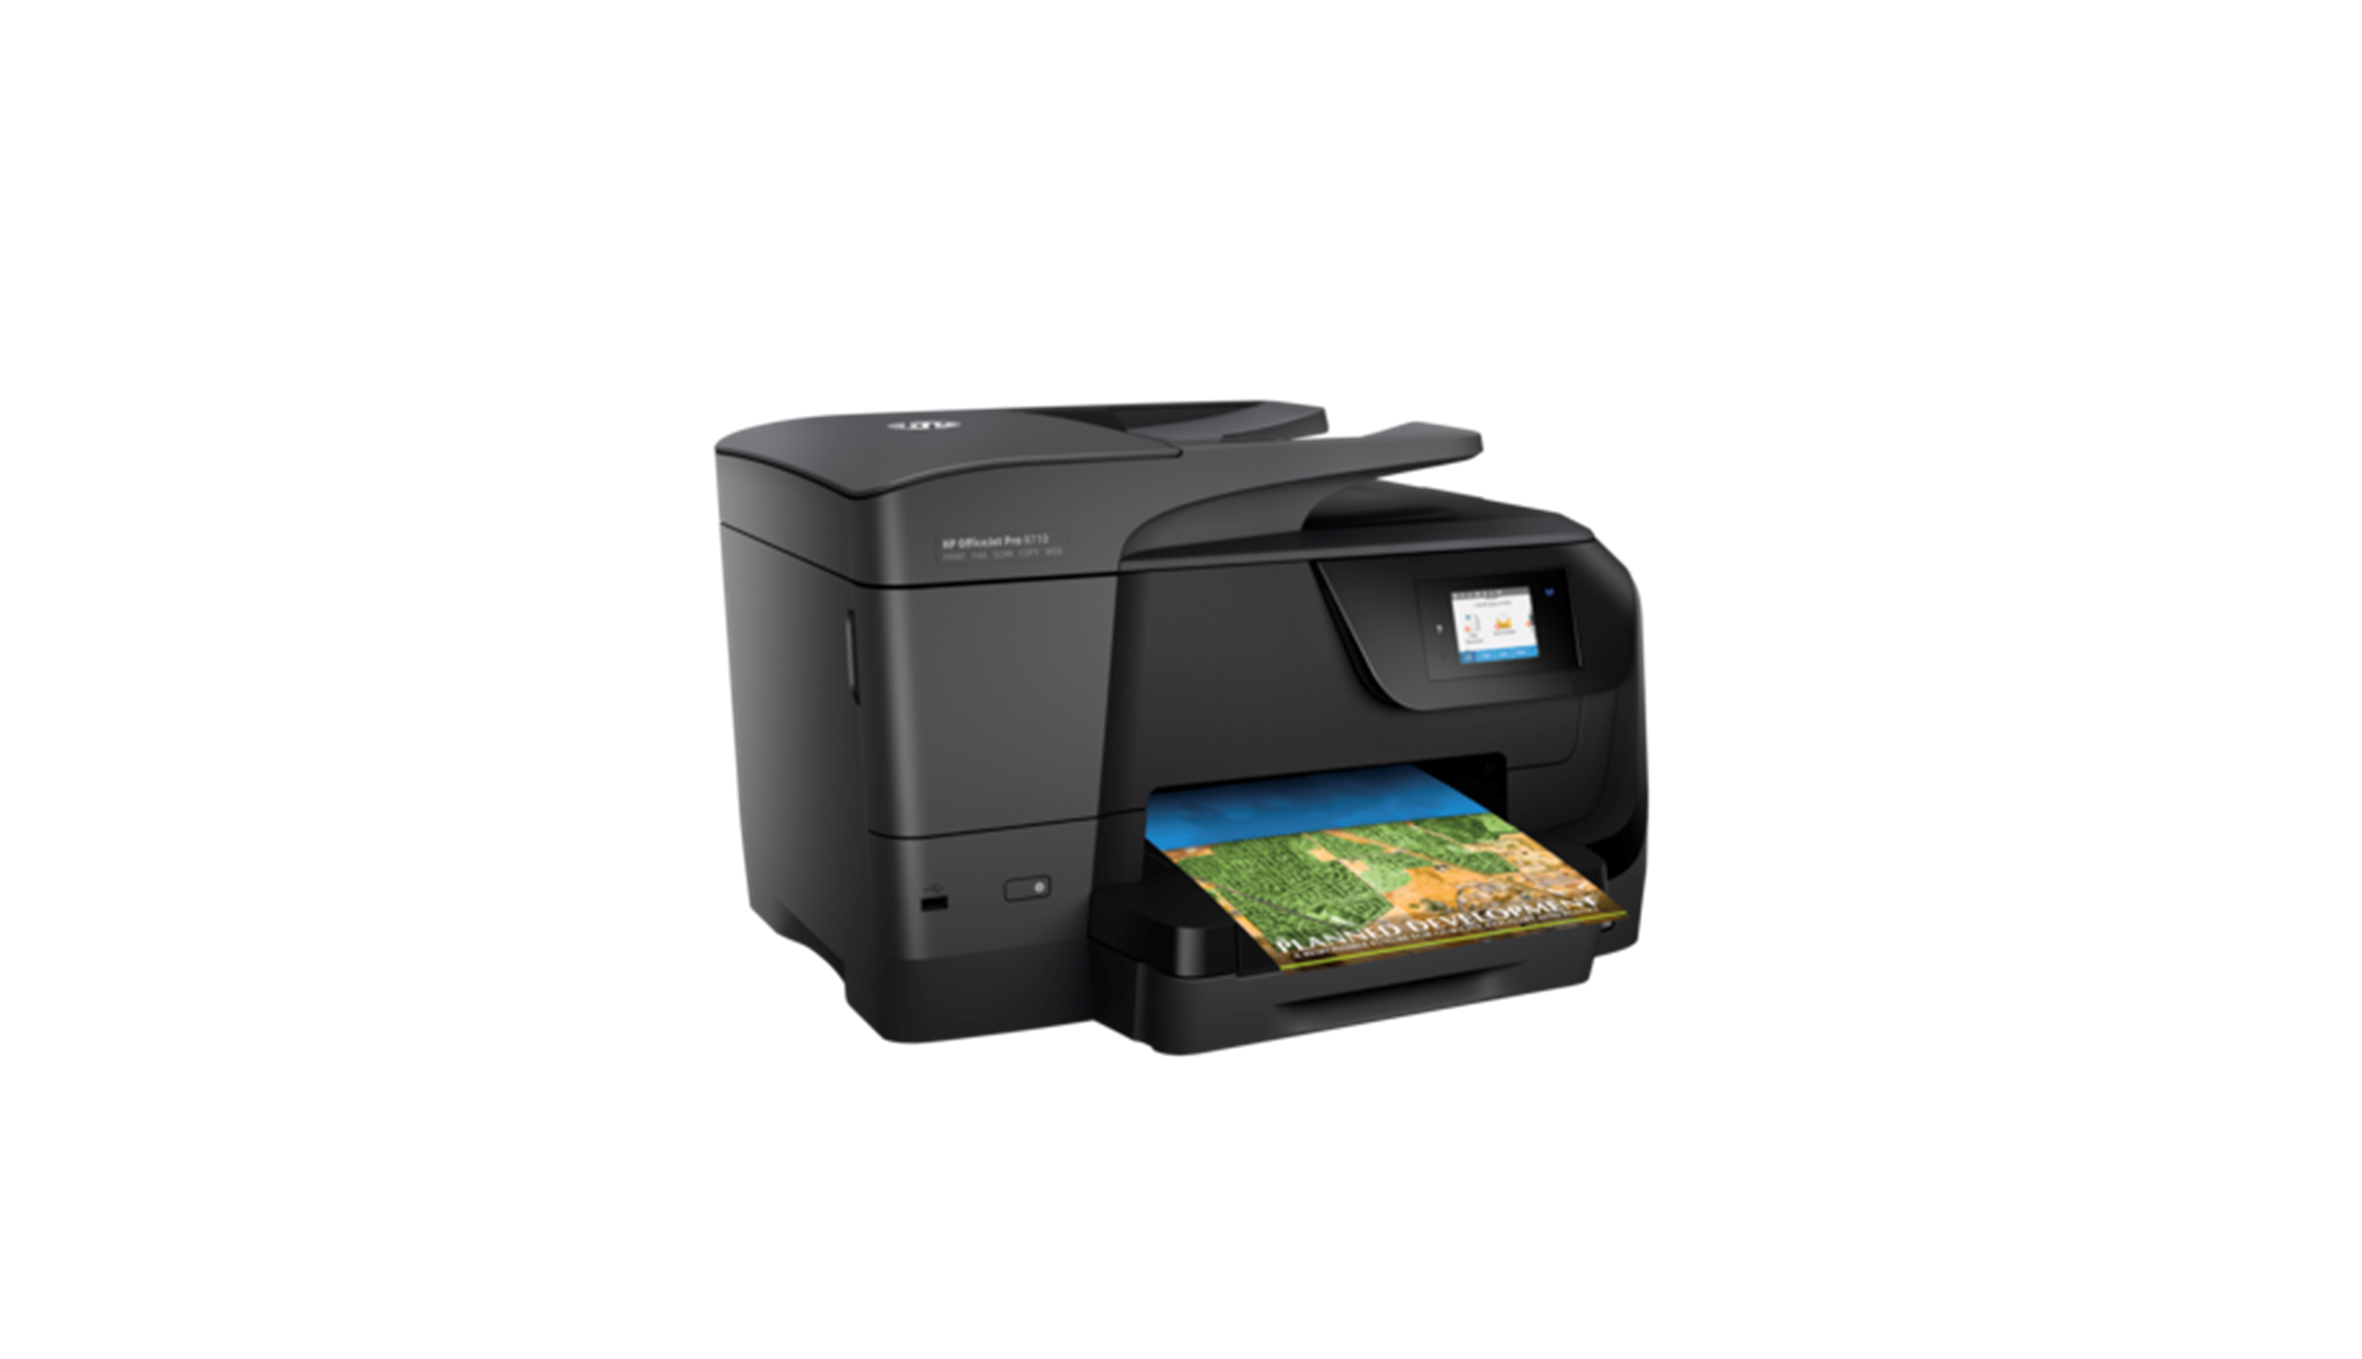 hp officejet pro 8710 driver software for mac